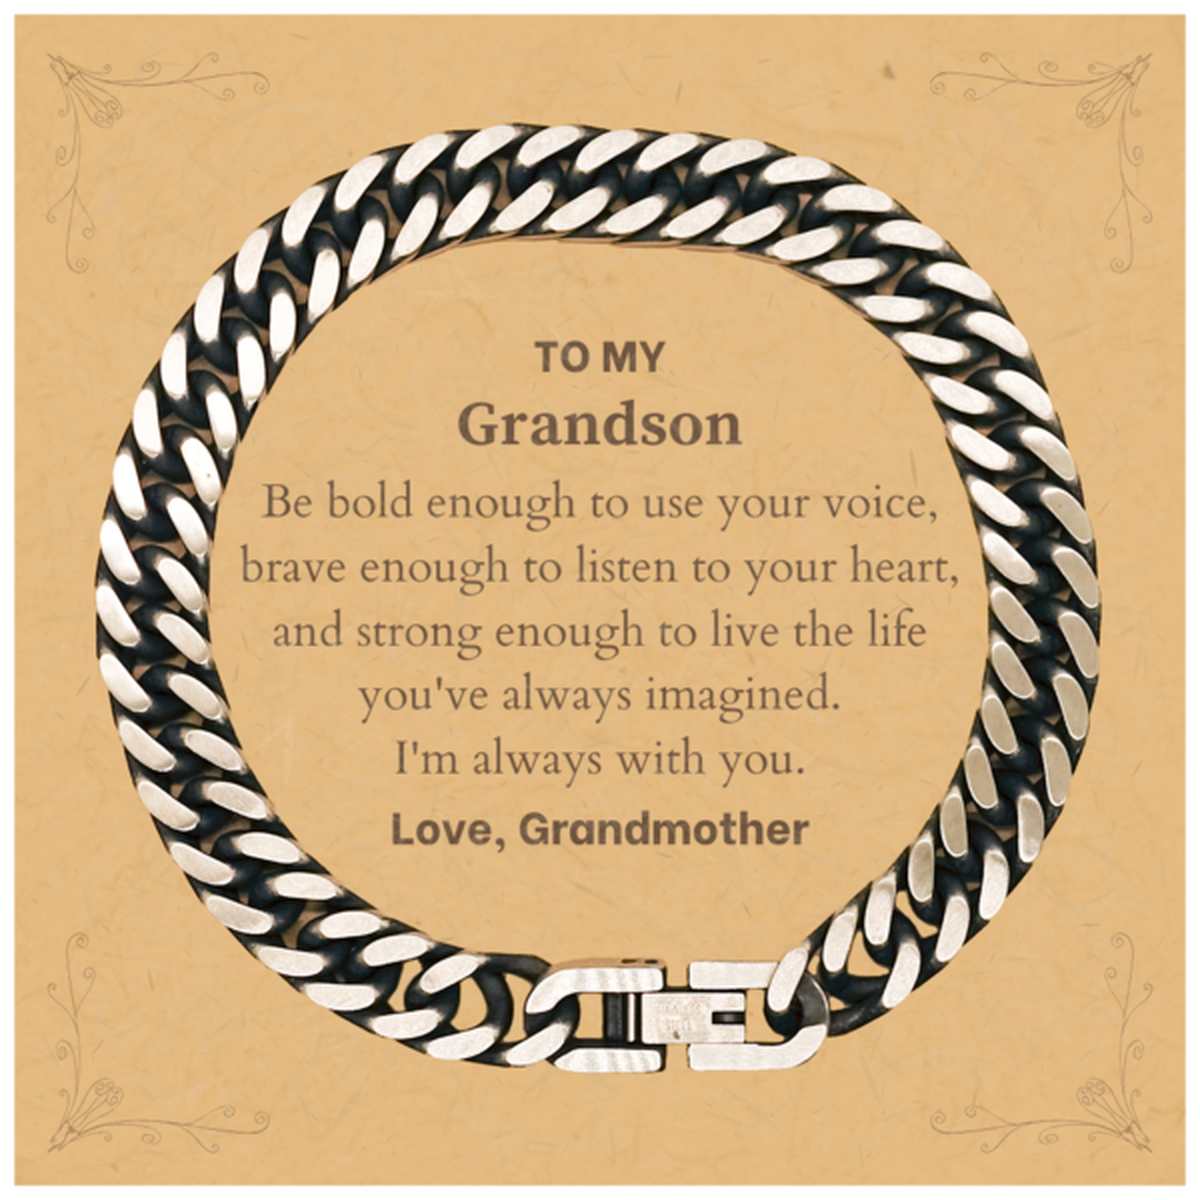 Keepsake Grandson Cuban Link Chain Bracelet Gift Idea Graduation Christmas Birthday Grandson from Grandmother, Grandson Be bold enough to use your voice, brave enough to listen to your heart. Love, Grandmother